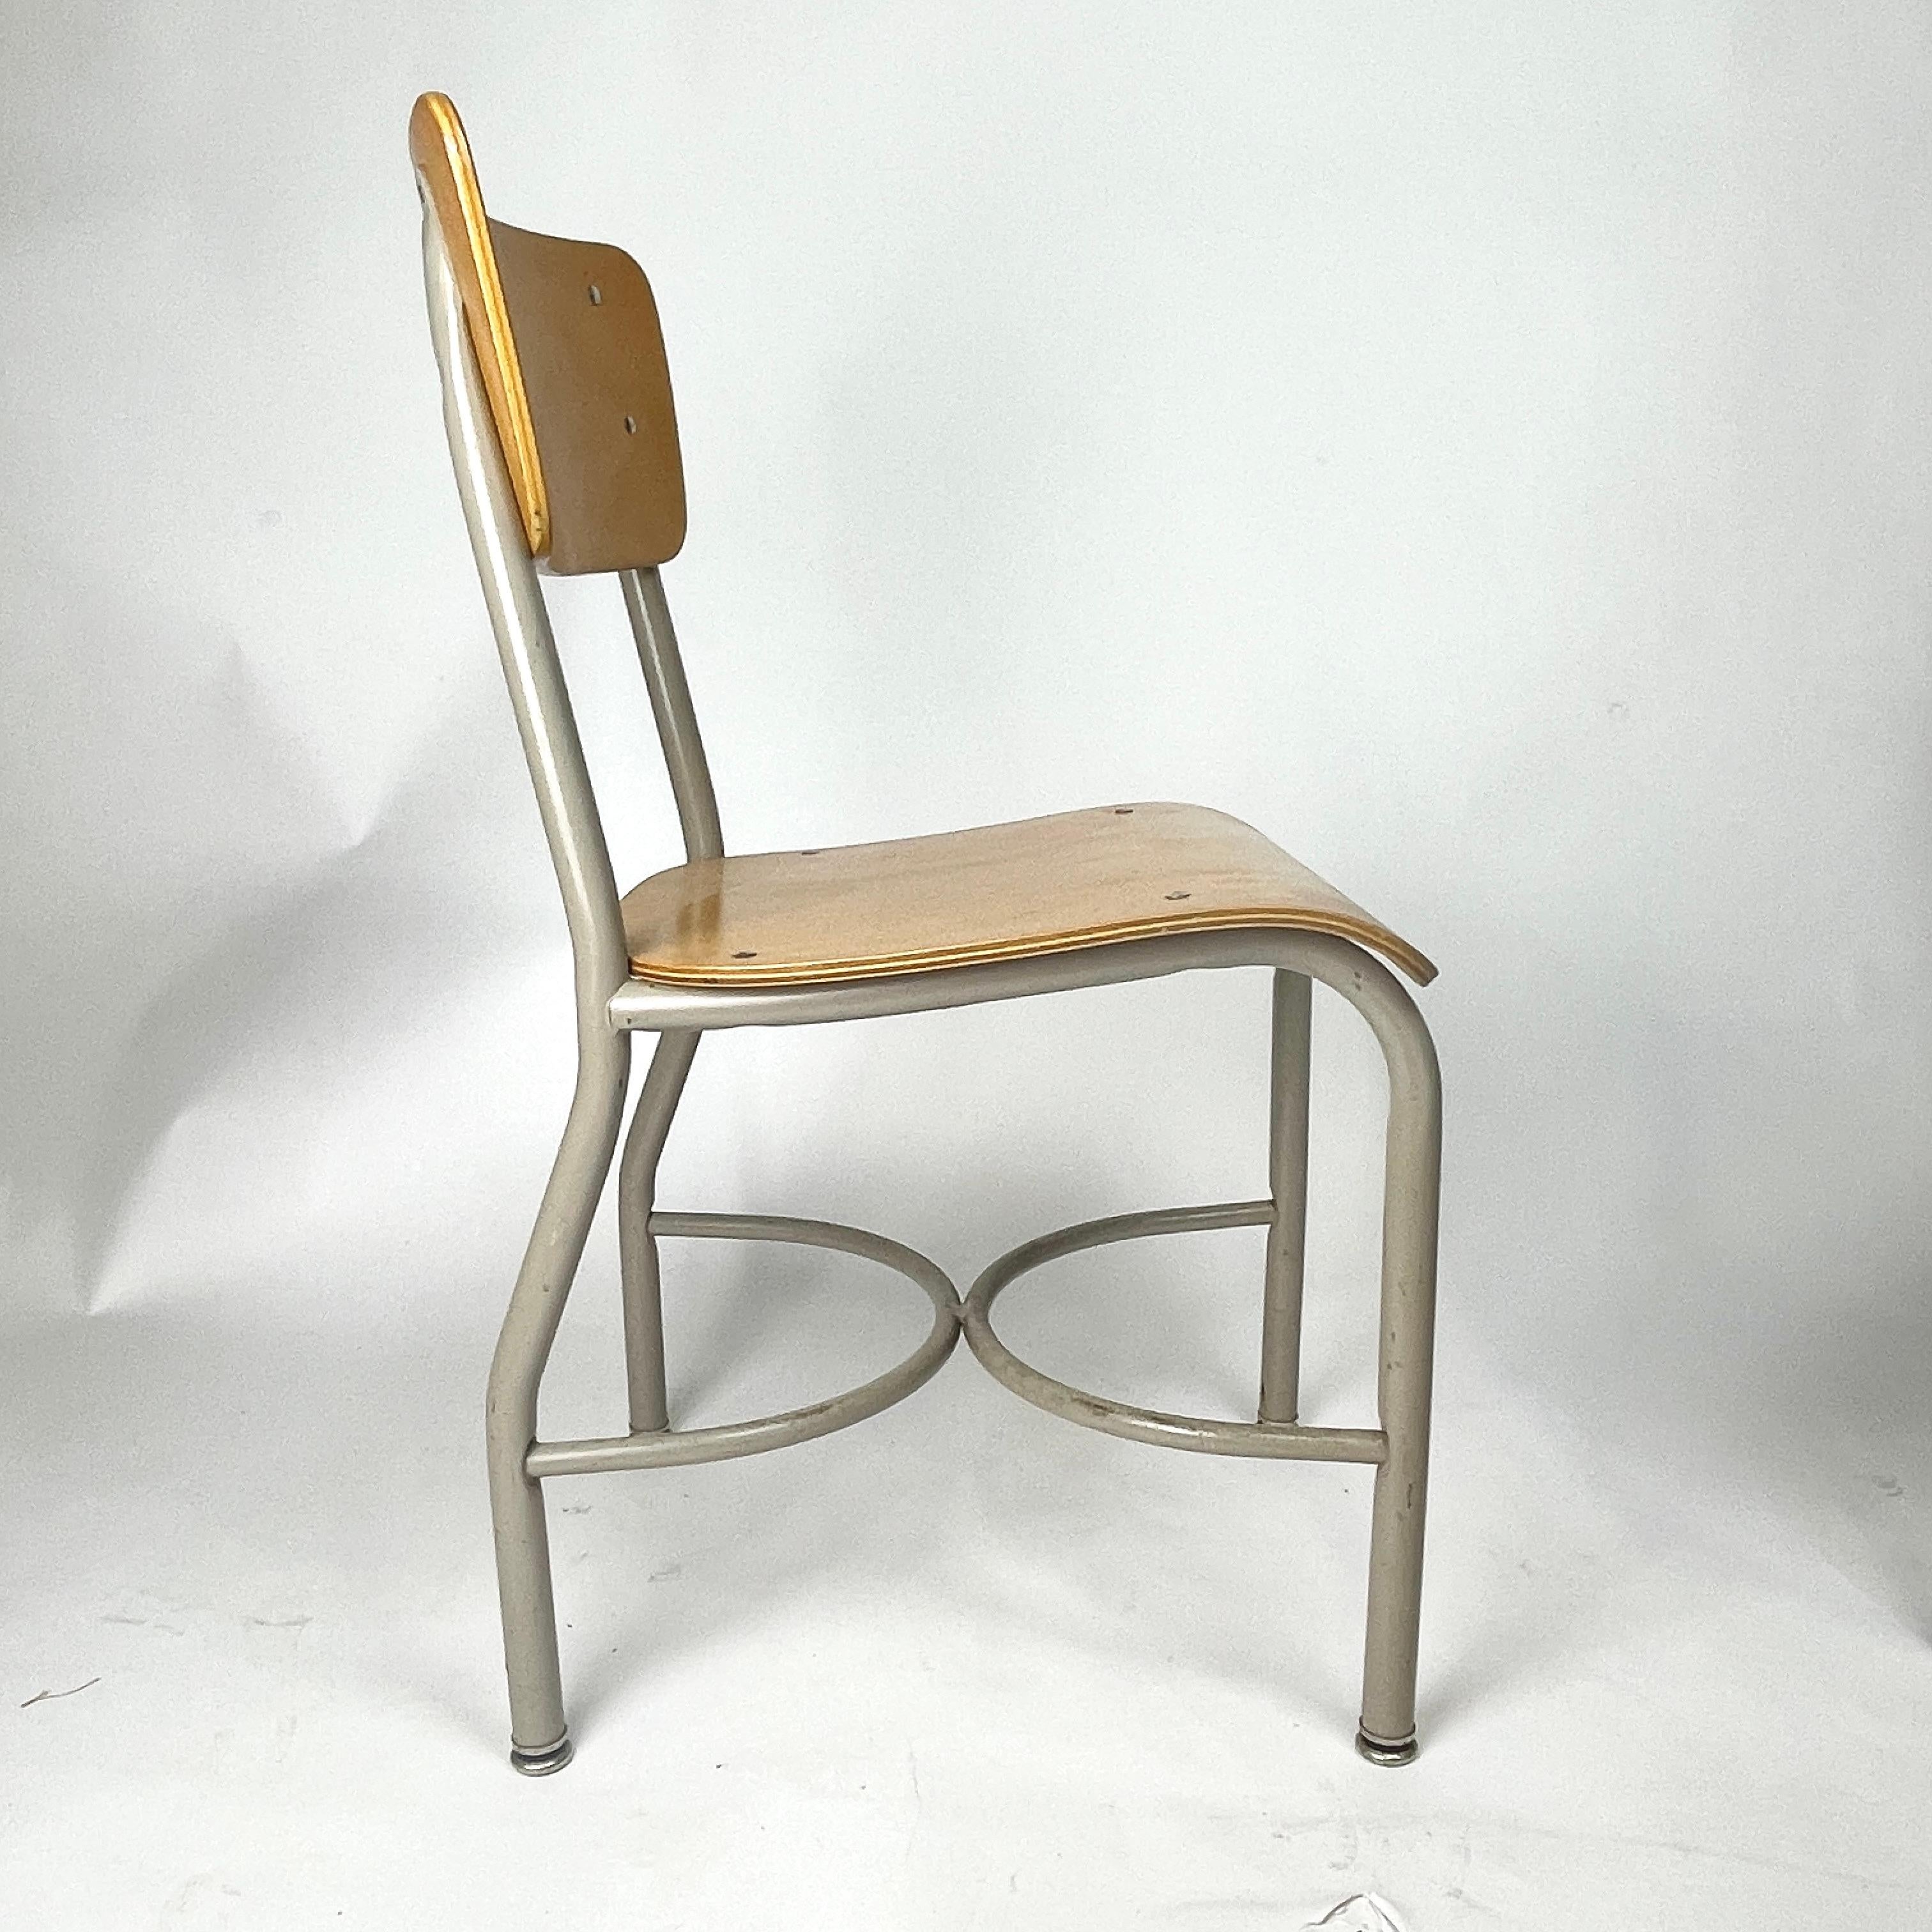 Midcentury French Style Grey & Birch Plywood School or Cafe Chairs -35 Available In Good Condition For Sale In Hudson, NY